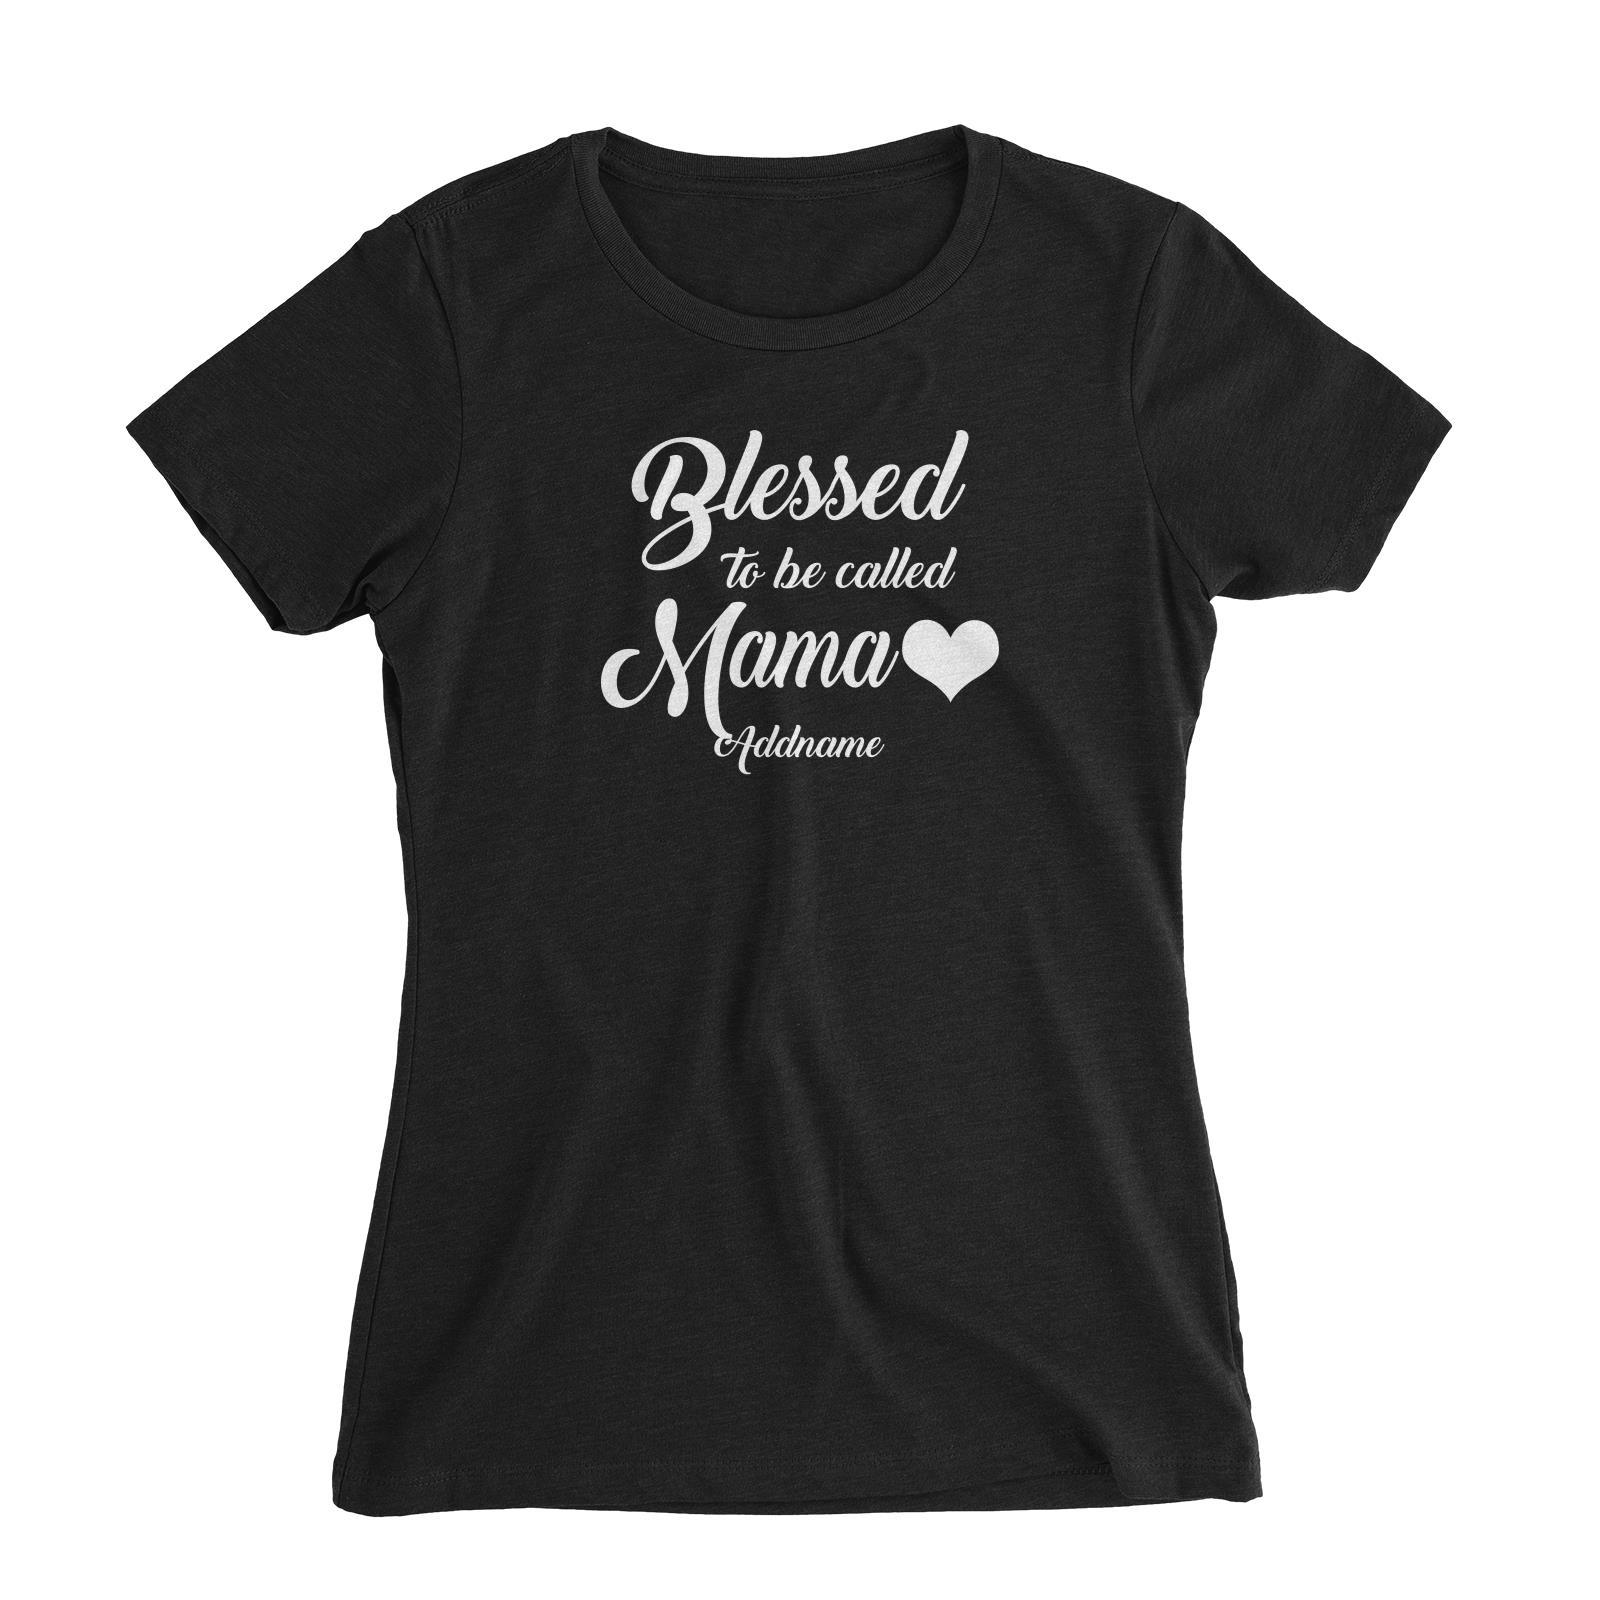 Blessed To Be Called Mama Women's Slim Fit T-Shirt